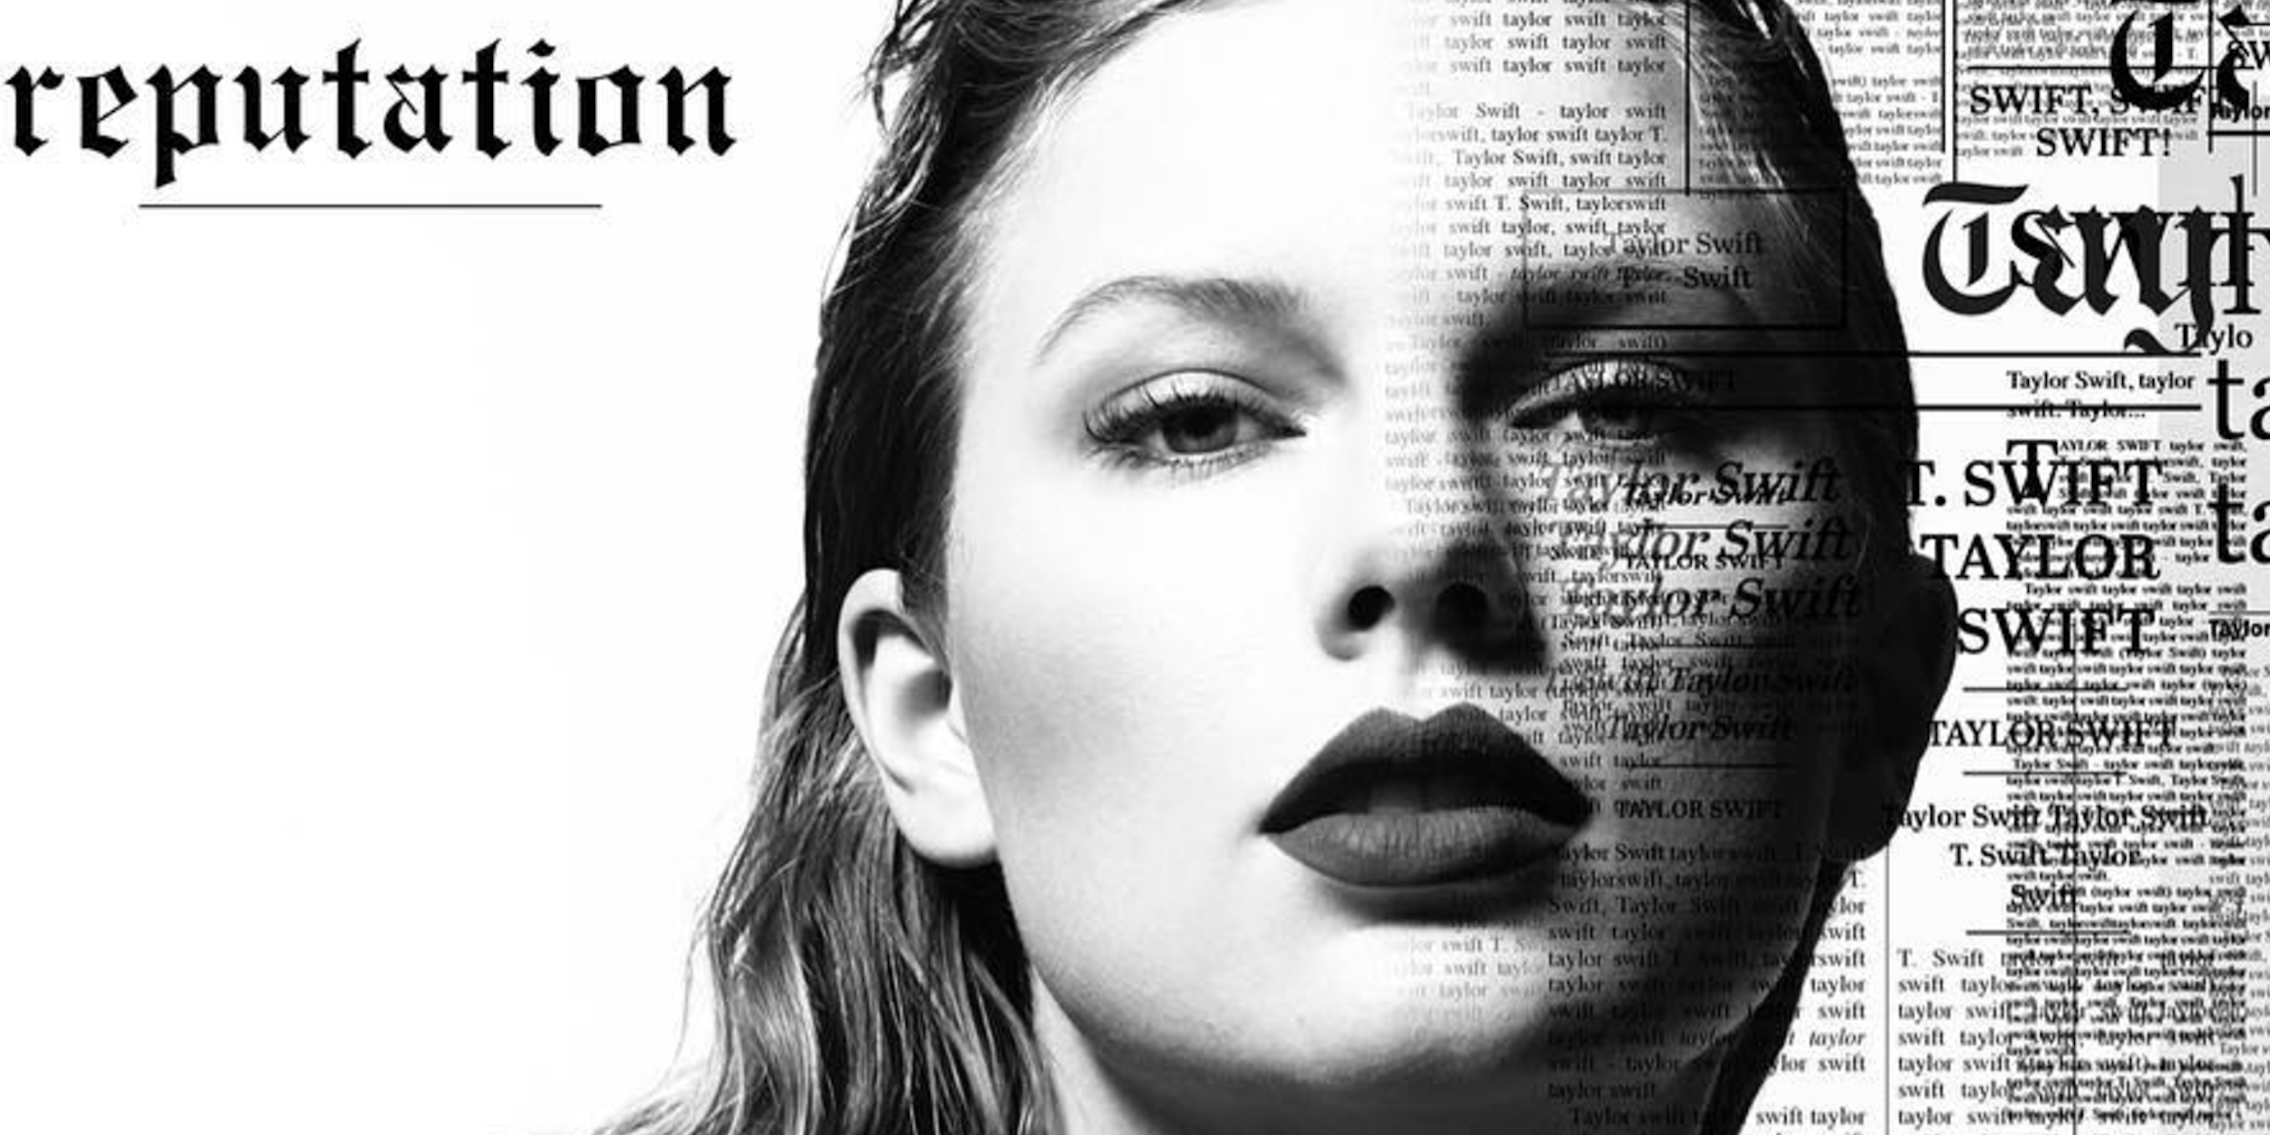 Taylor Swift releases new album, 'Reputation